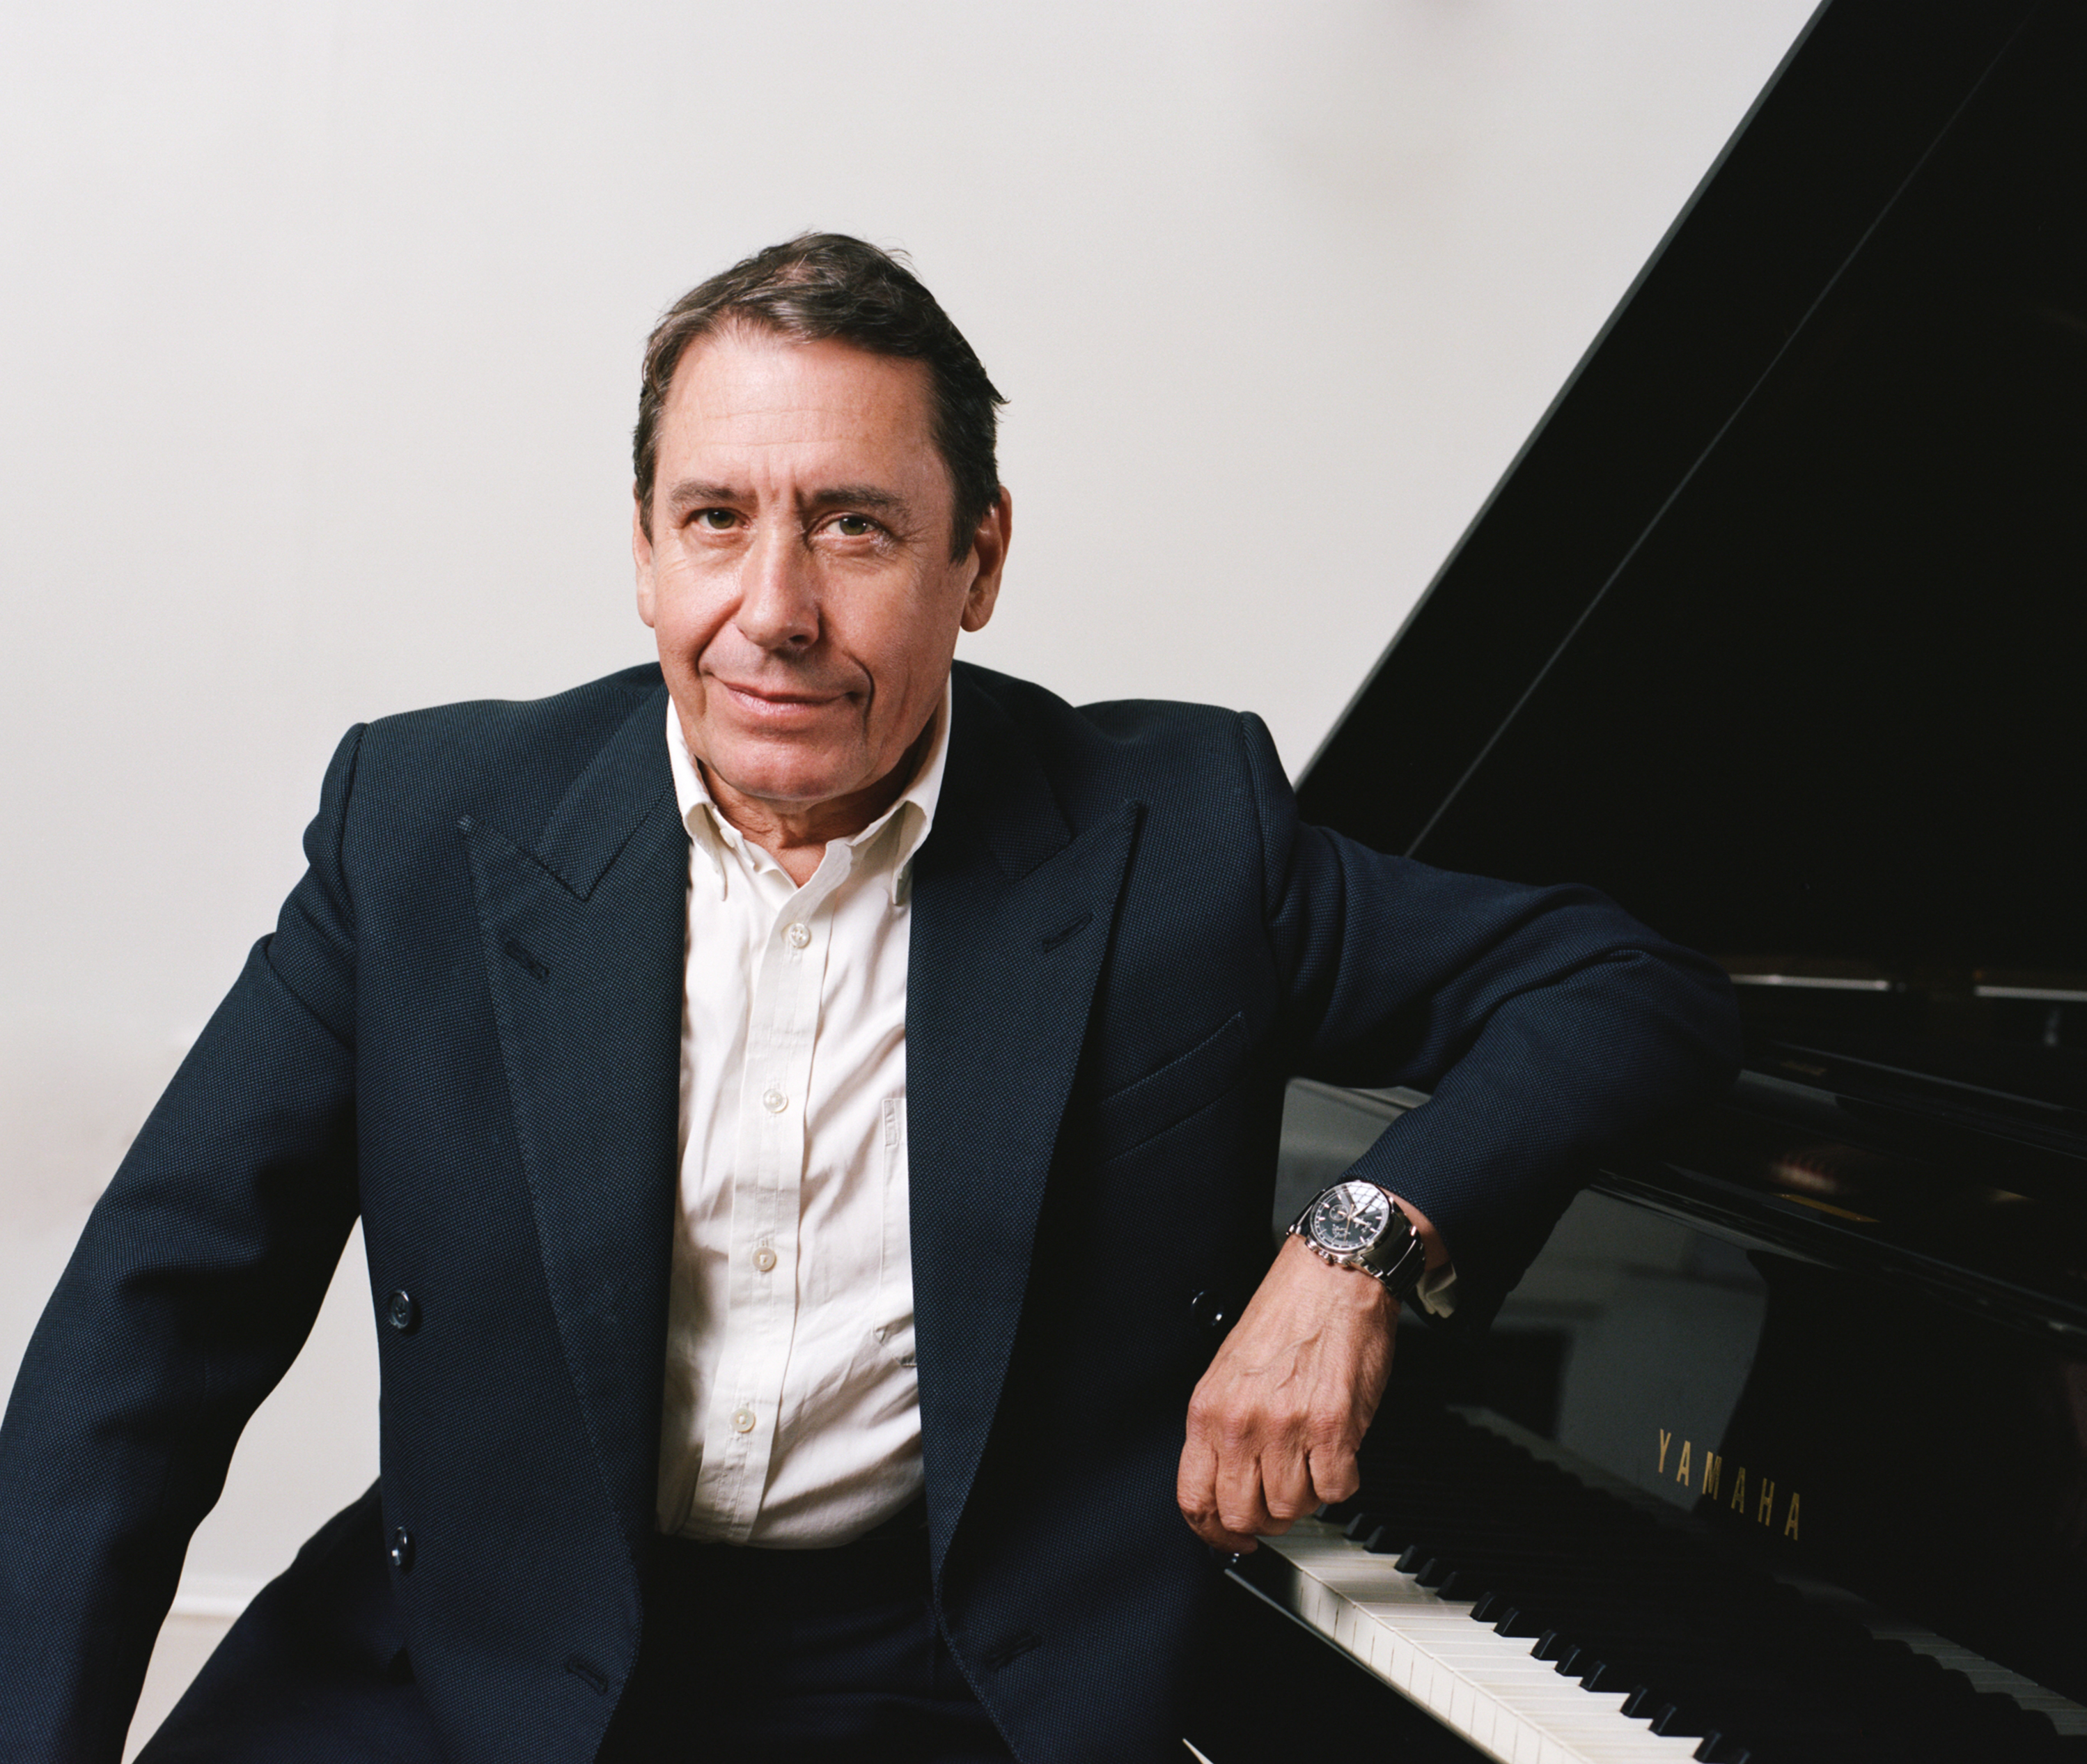 An Evening with Jools Holland with special guest Ruby Turner